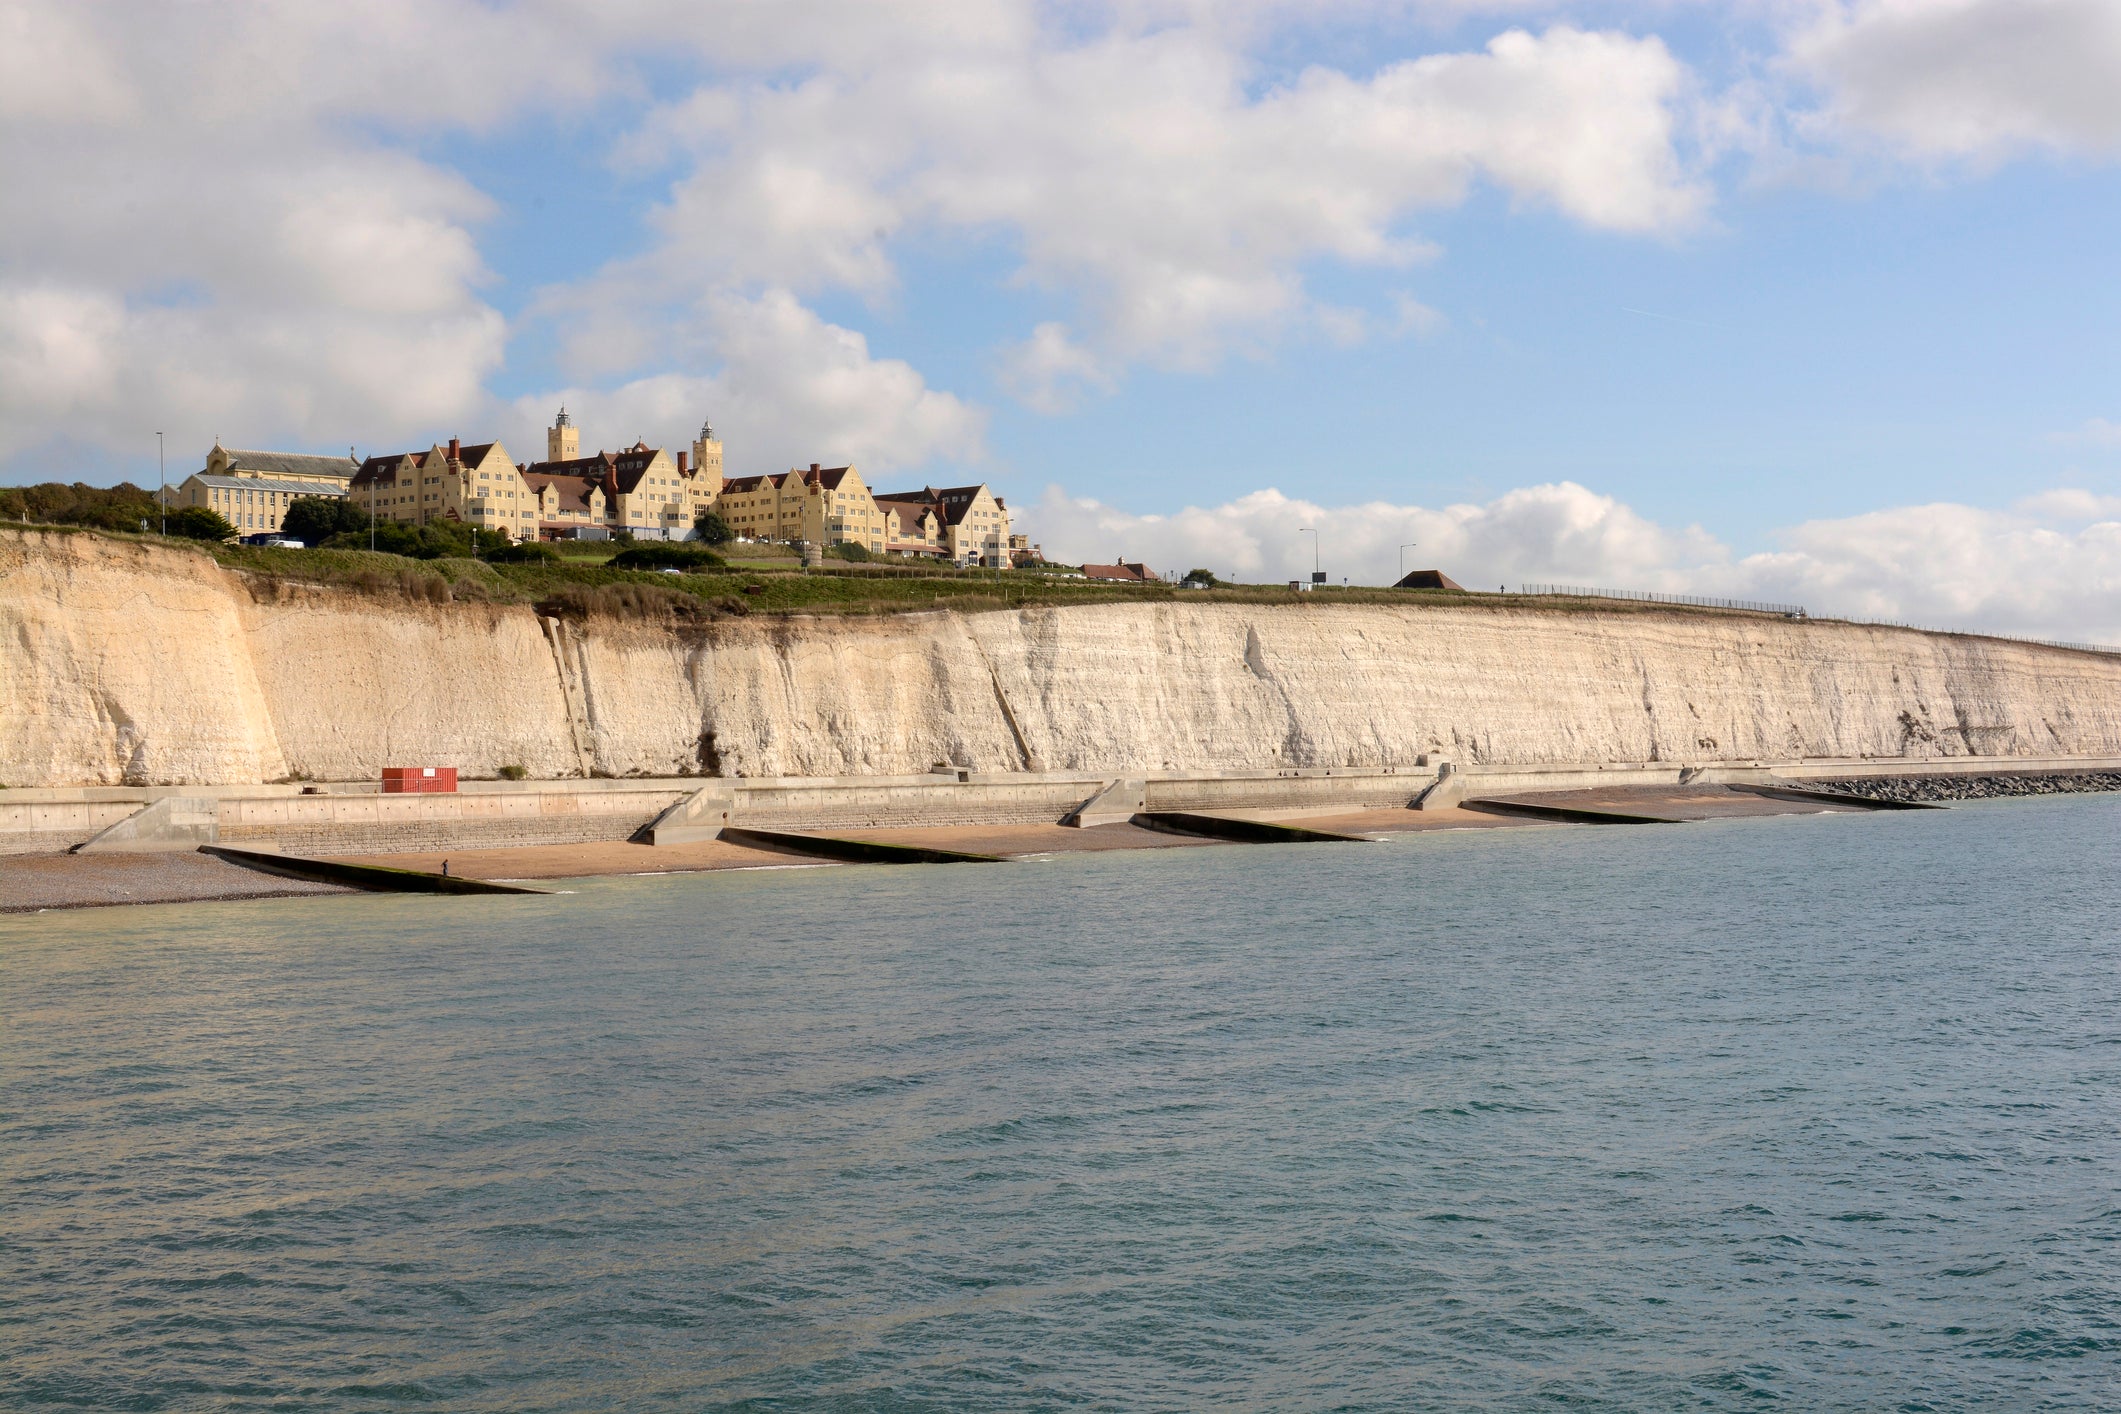 brighton, east sussex, courts, man ‘threw 10 year old boy off 100ft cliff after he tried to stop him raping his sister’